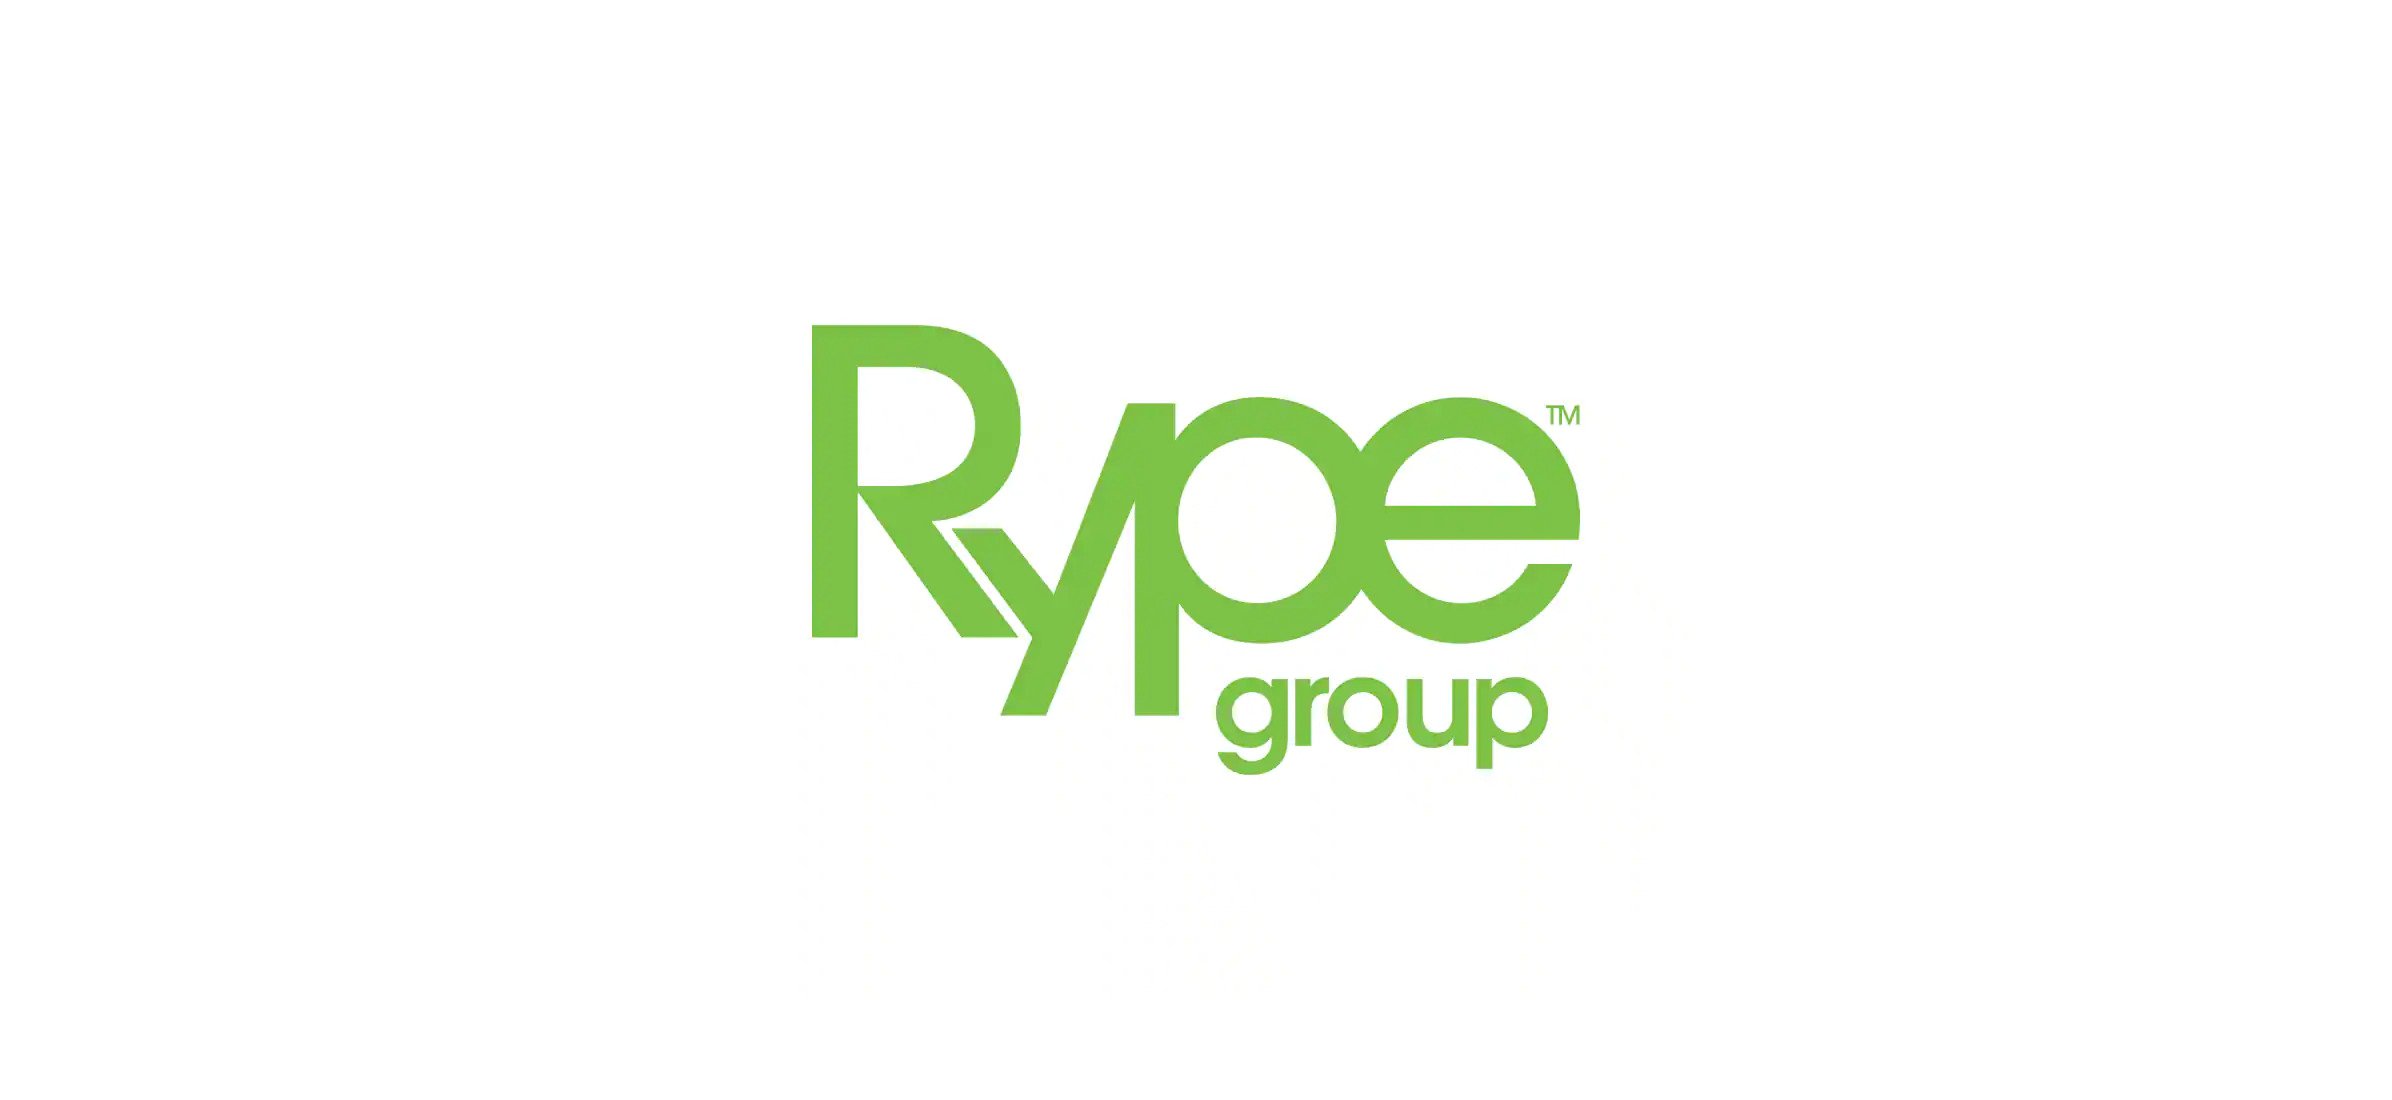 The Rype Group logo